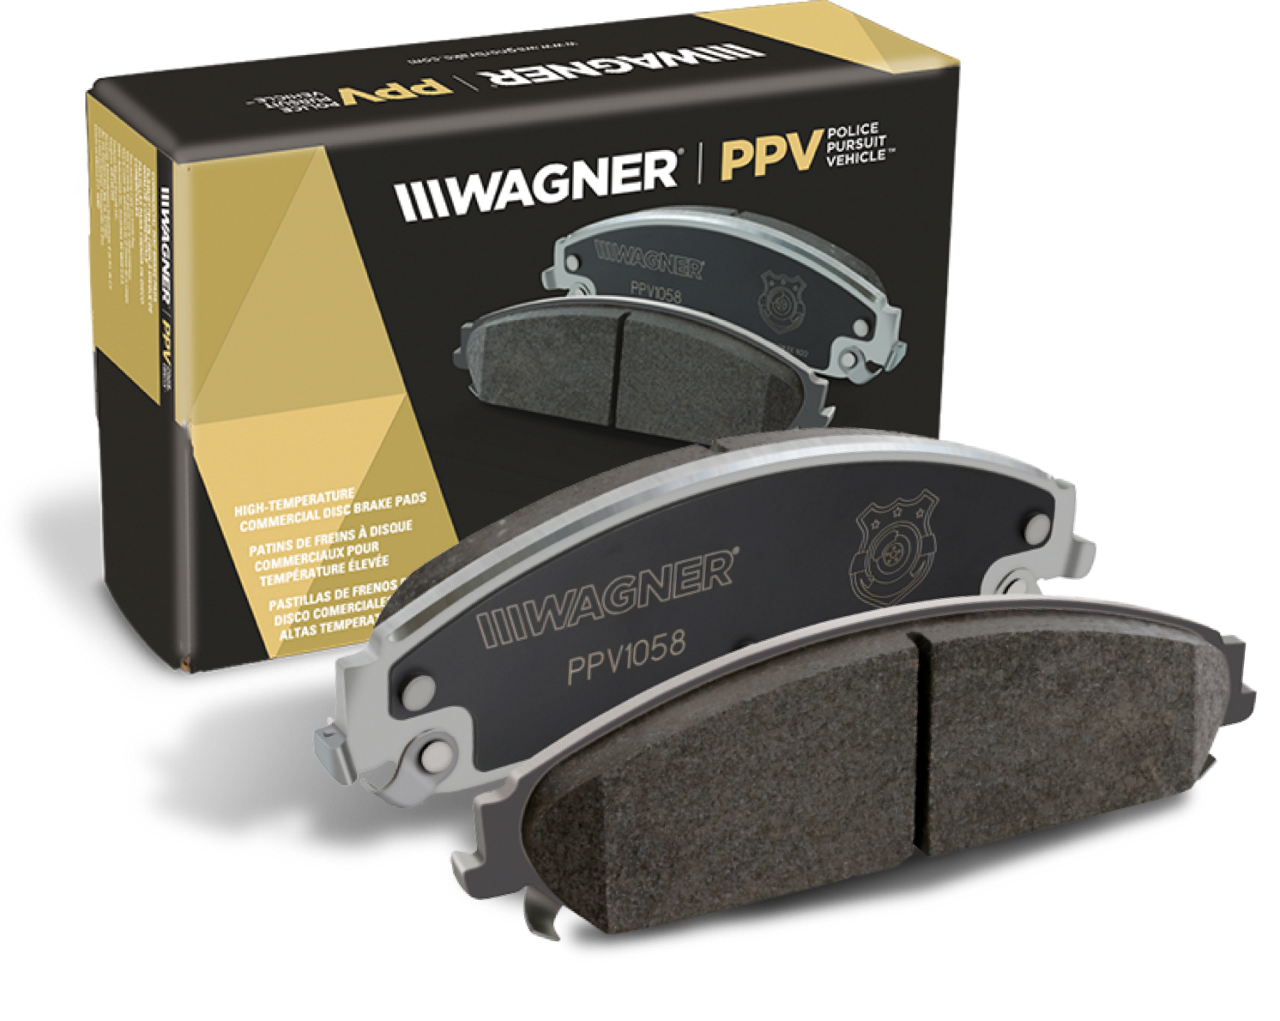 Two Wagner PPV brake pads sitting in front of the box they came in